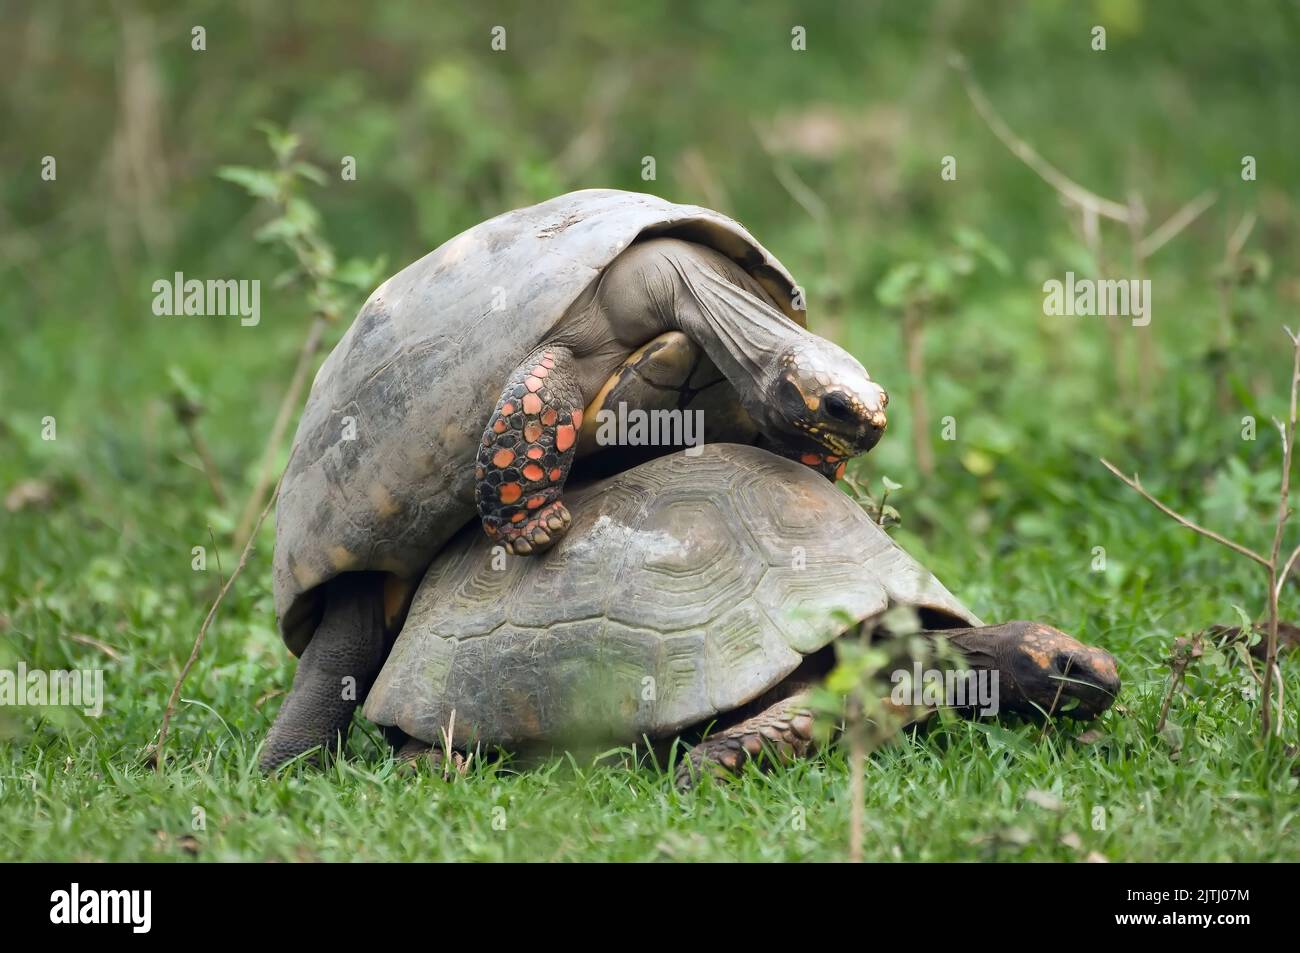 Red Footed Tortoise (Geochelone carbonaria), Pantanal, Mato Grosso, Brazil Stock Photo